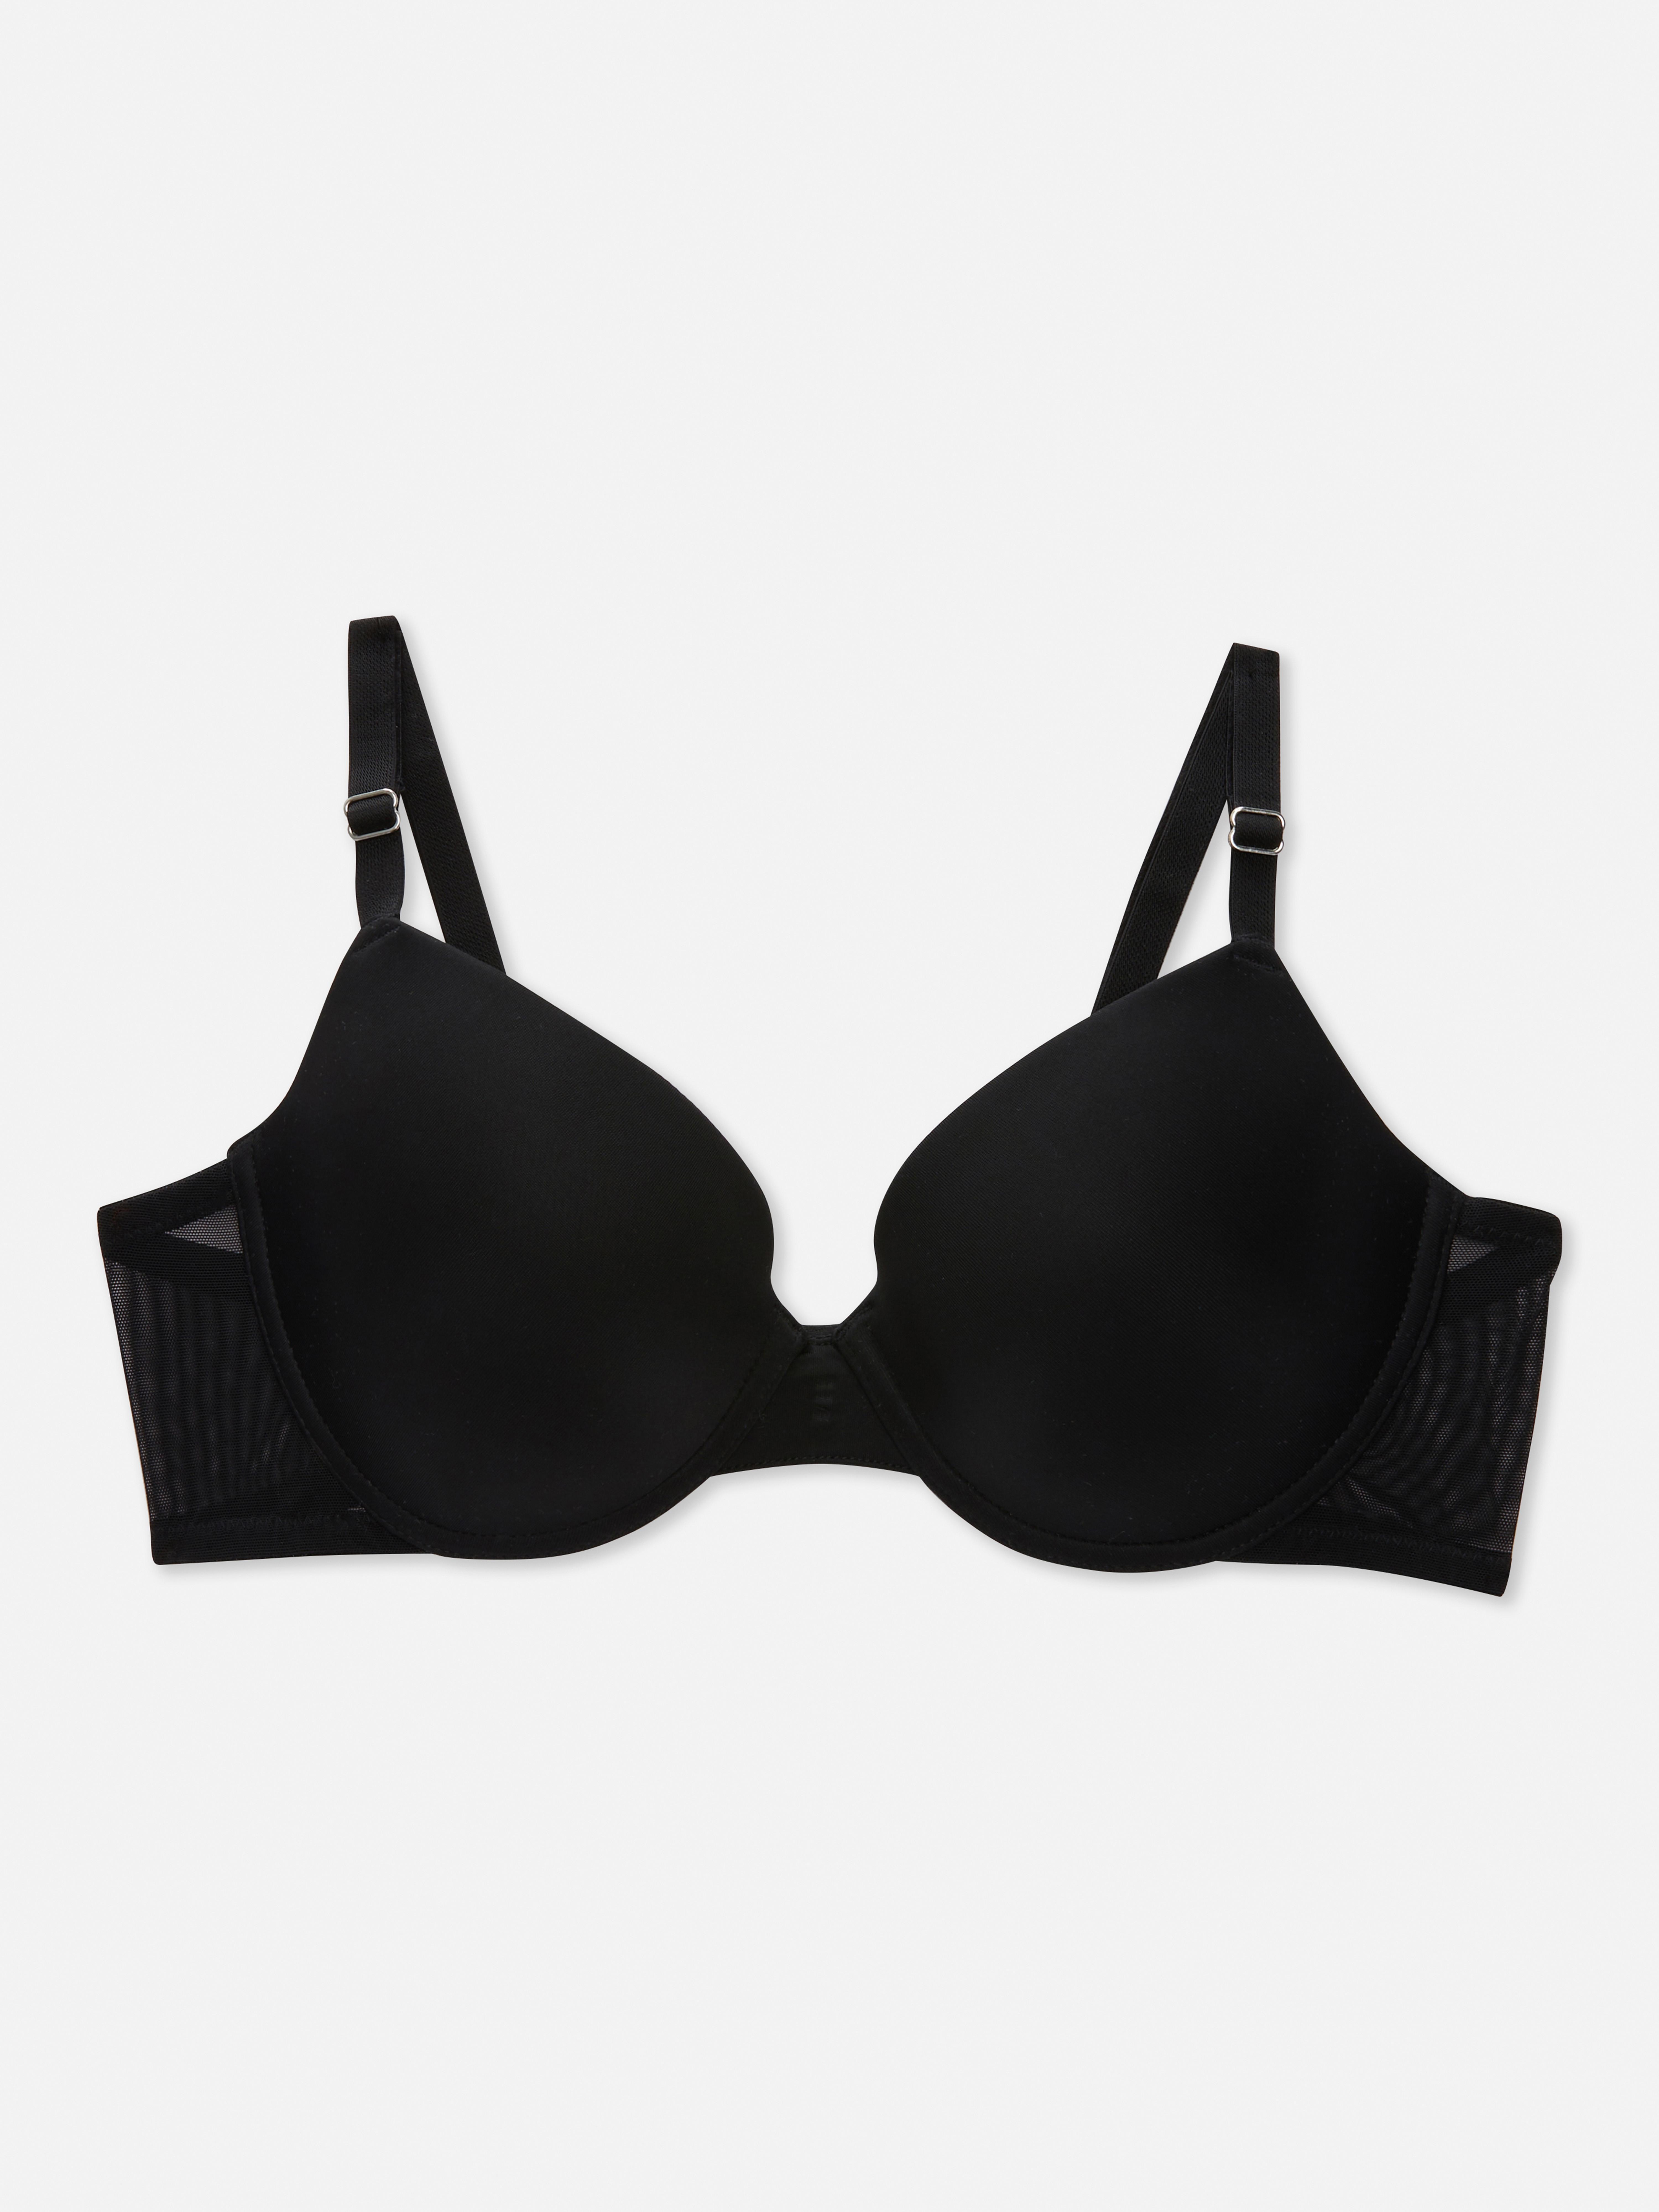 Primark Online Shop Women's T-Shirt Bra with Padded Push Up